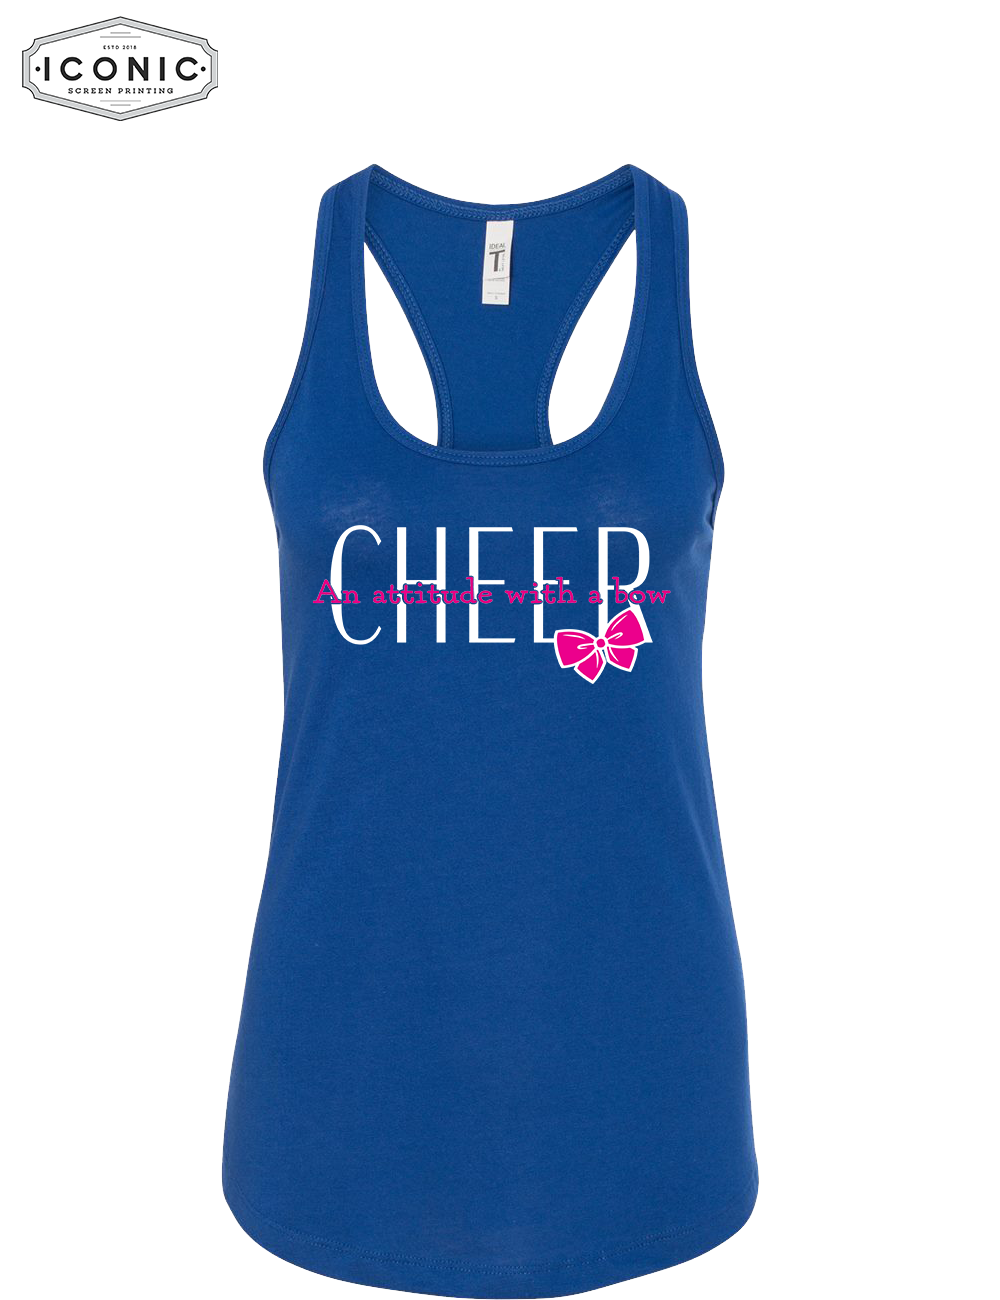 Attitude With A Bow - Women's Ideal Racerback Tank - Clearance